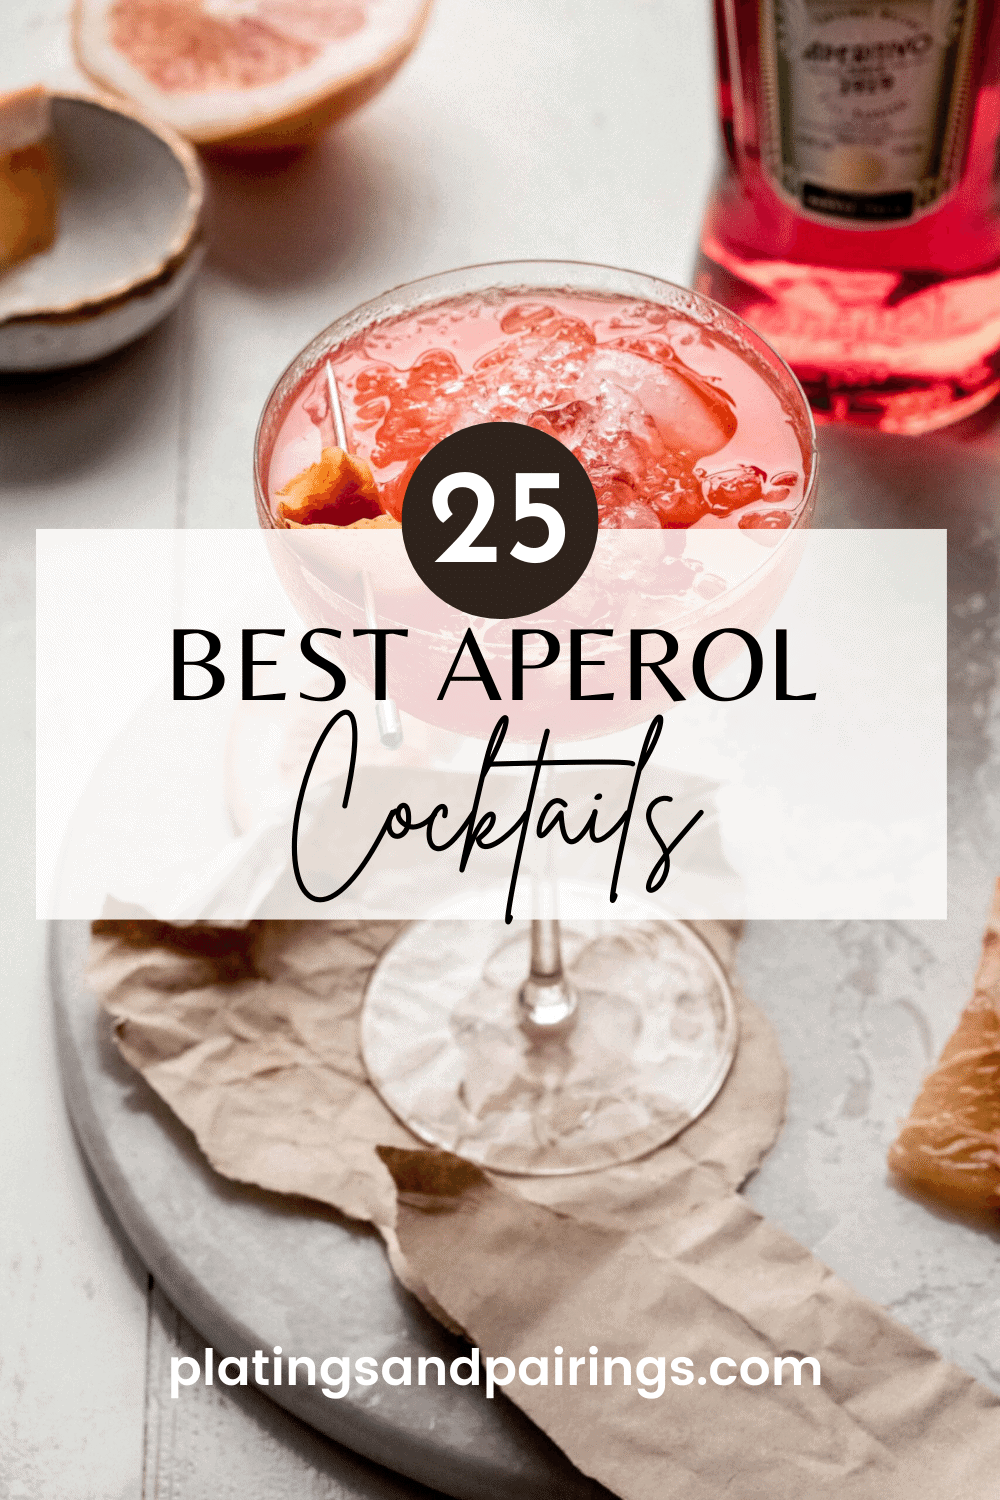 Quick Guide to Aperol – A Couple Cooks